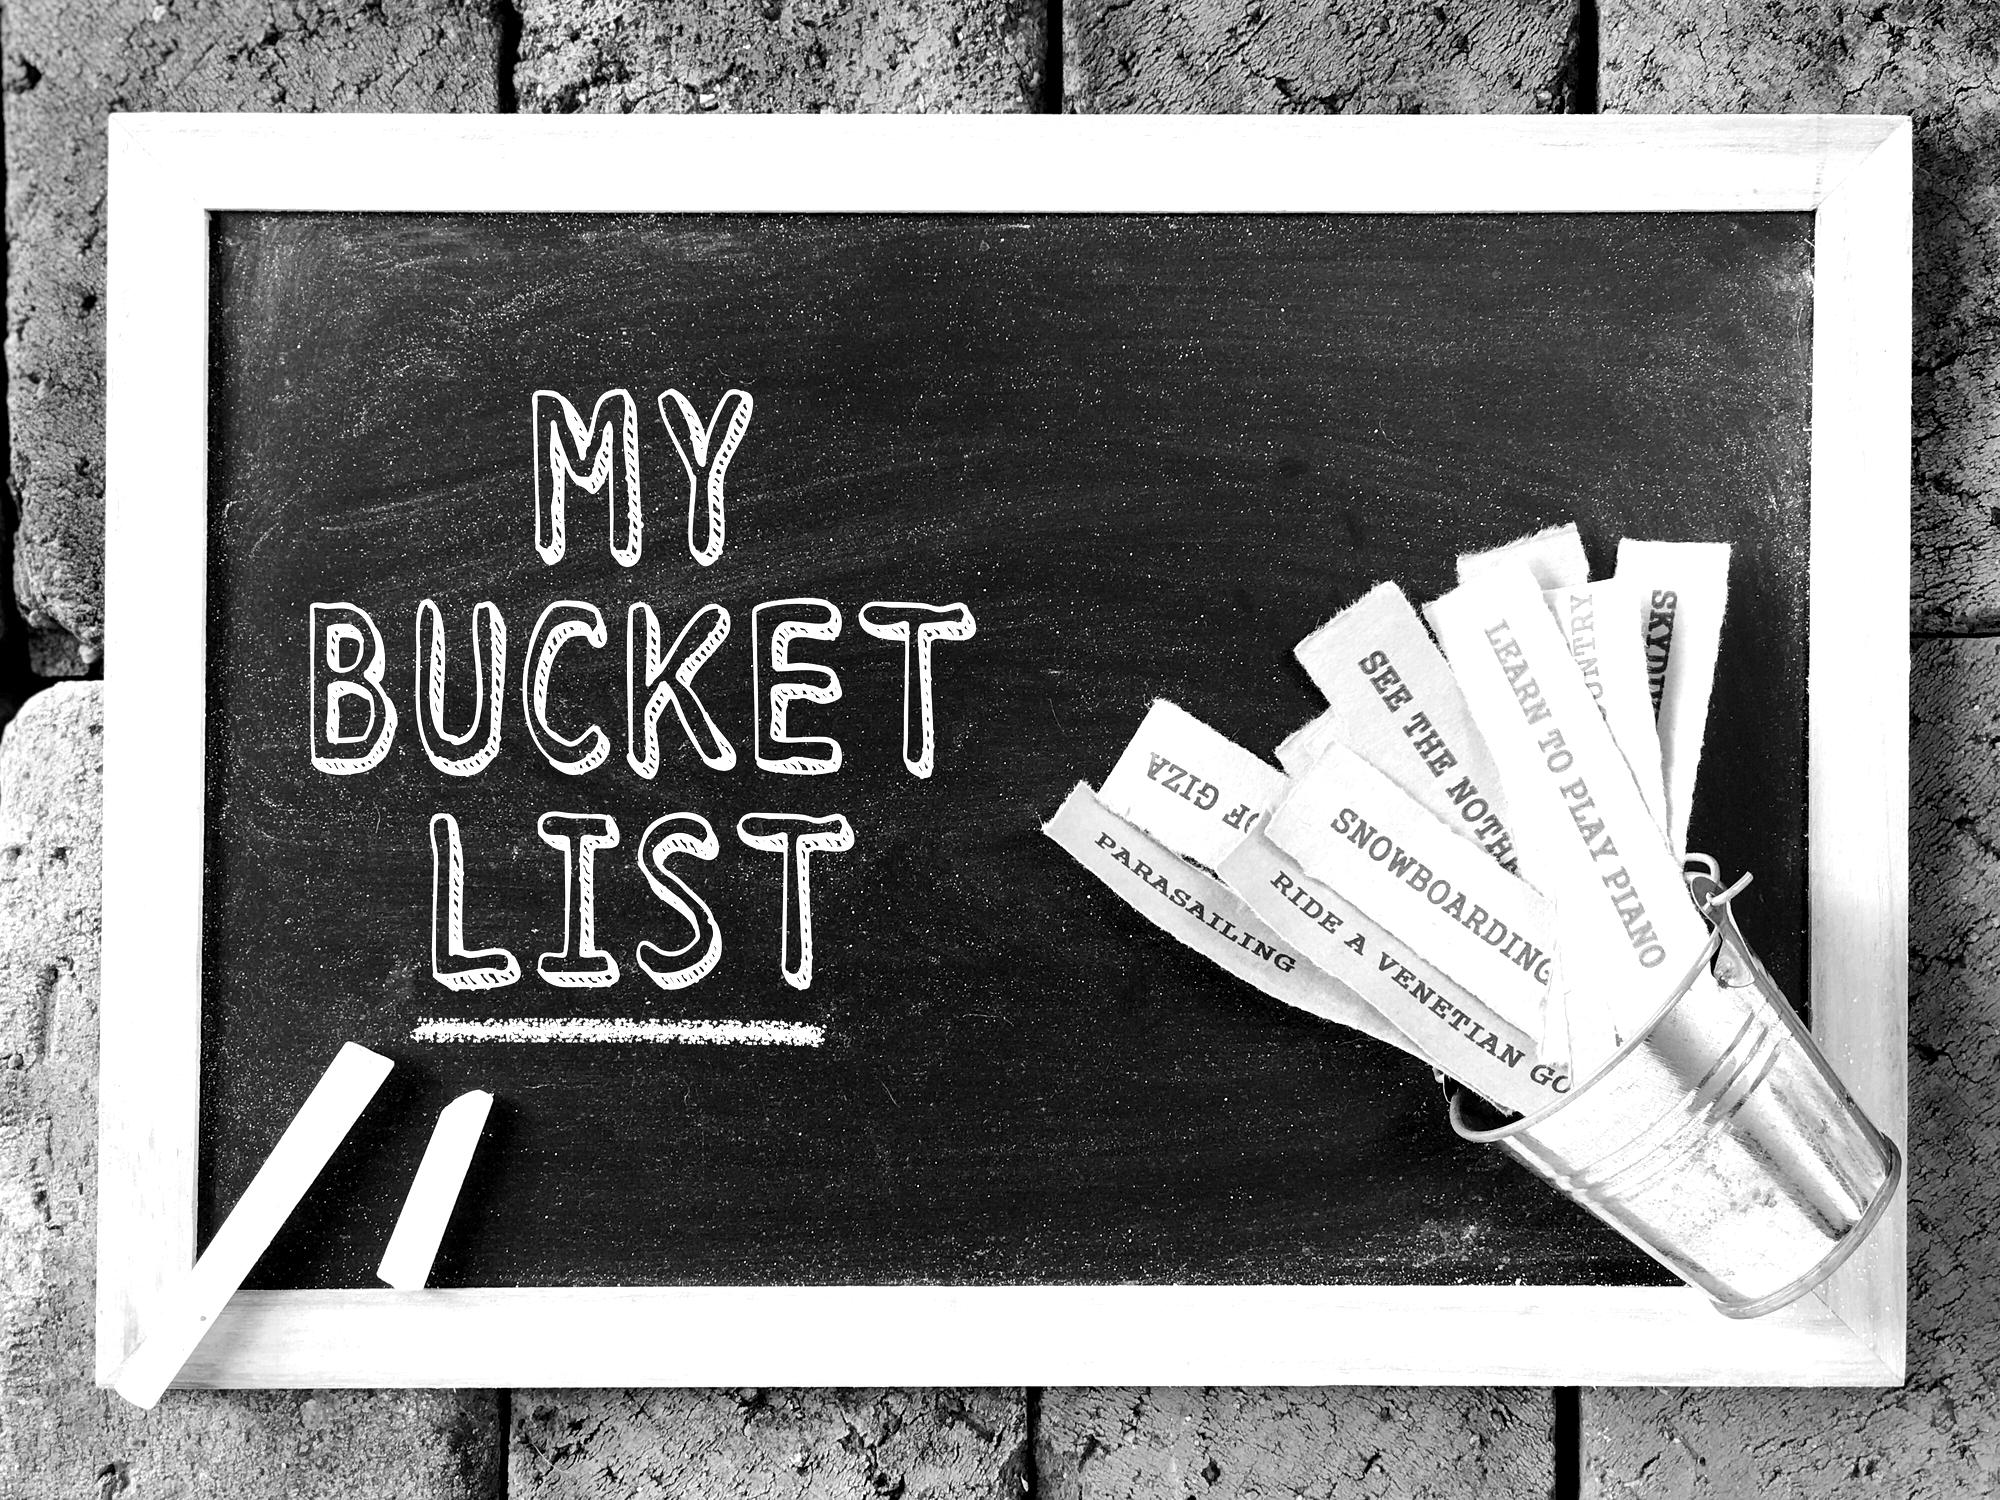 What’s in your bucket list